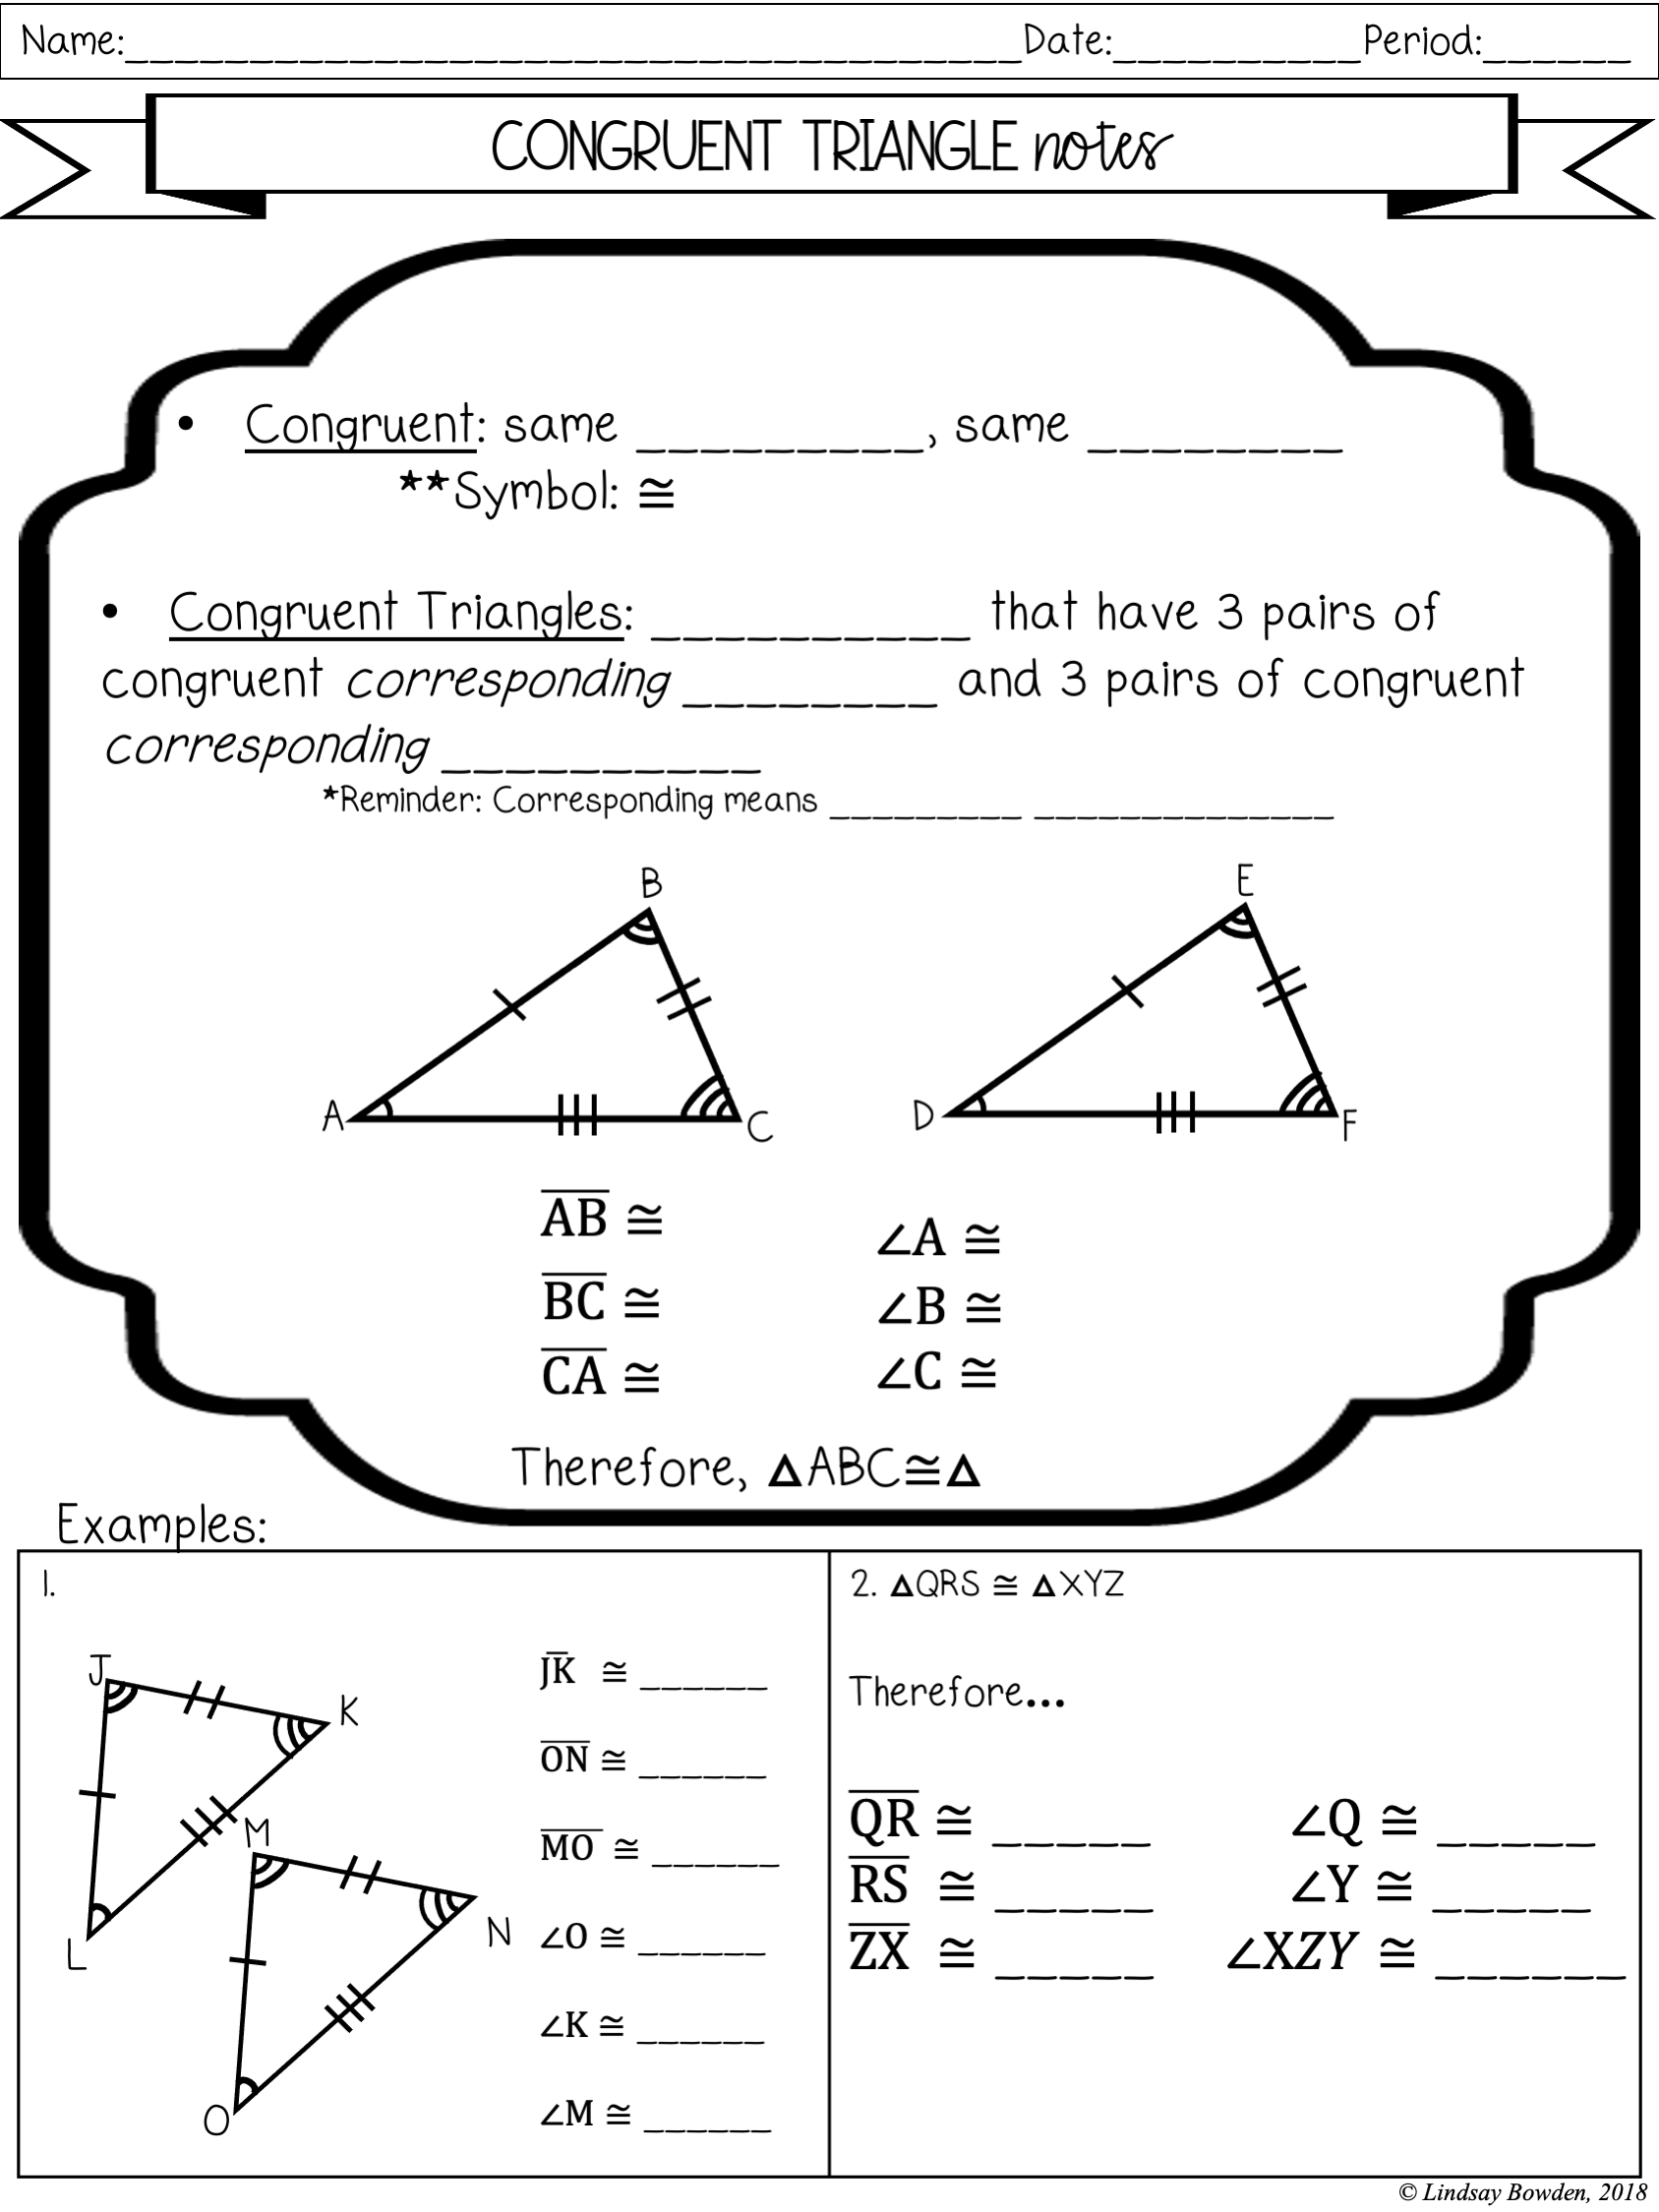 Congruent Triangles Notes and Worksheets - Lindsay Bowden Pertaining To Congruent Triangles Worksheet Answers